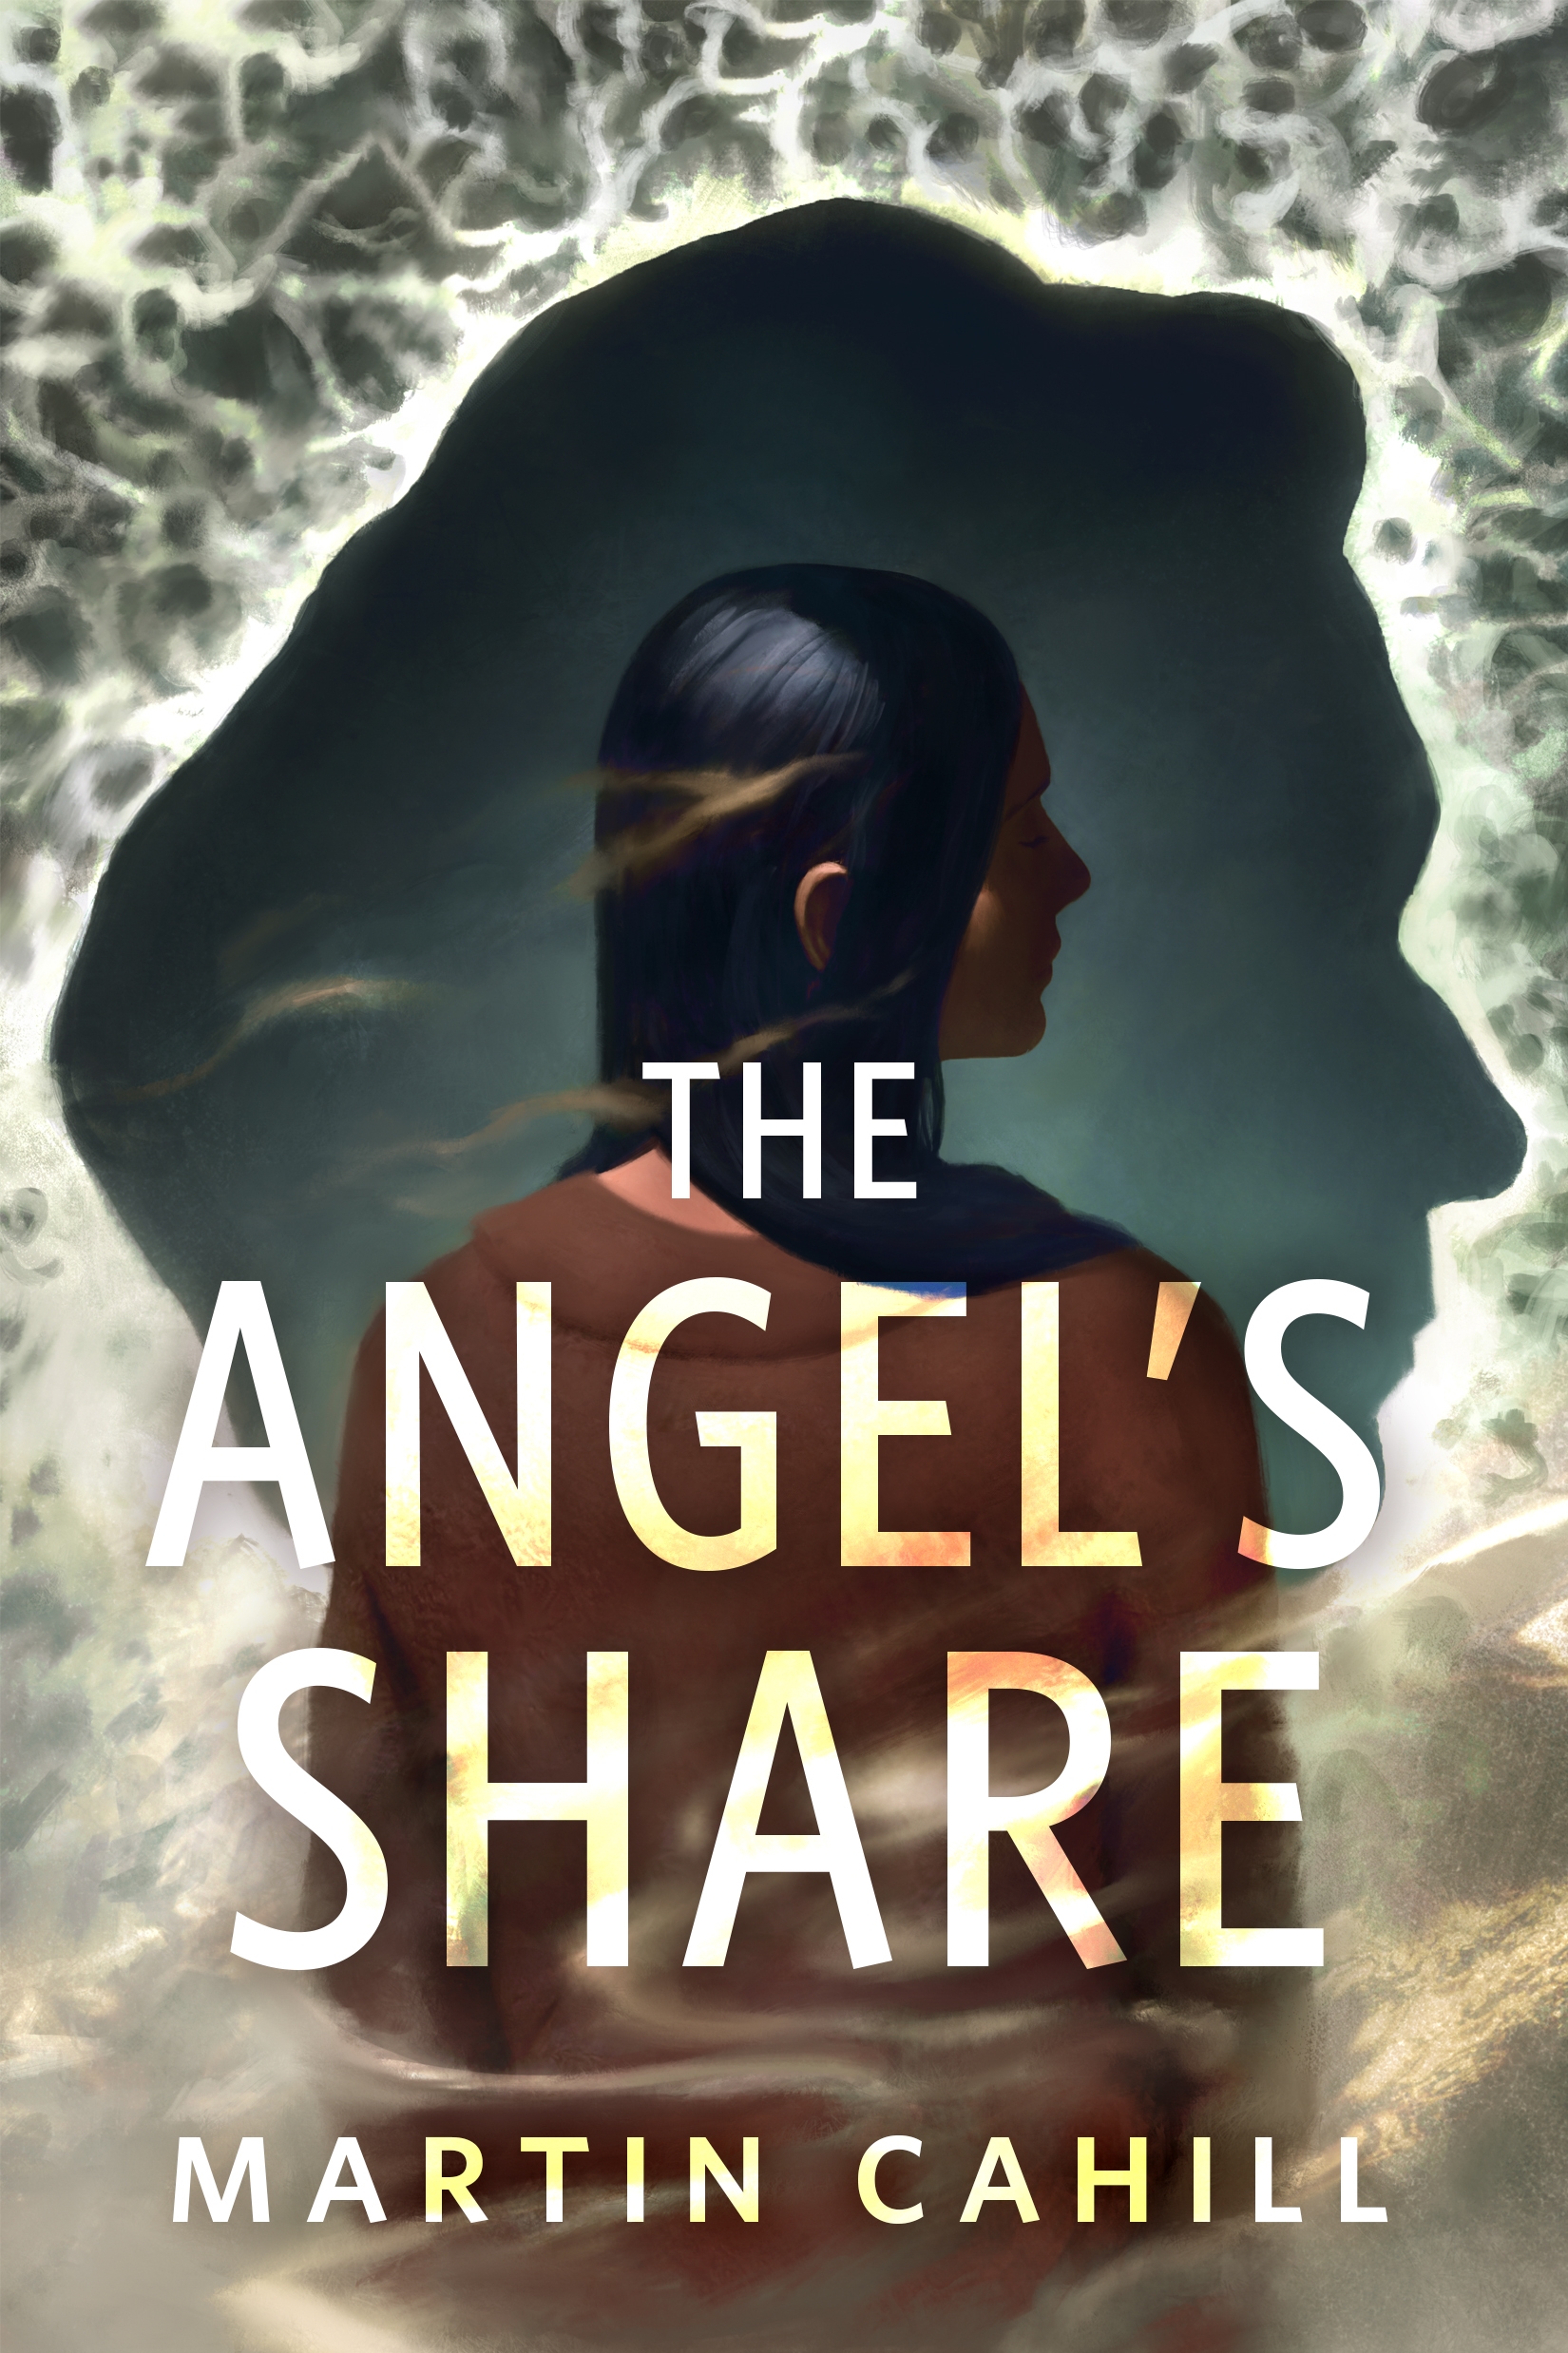 The Angel's Share : A Tor Original by Martin Cahill